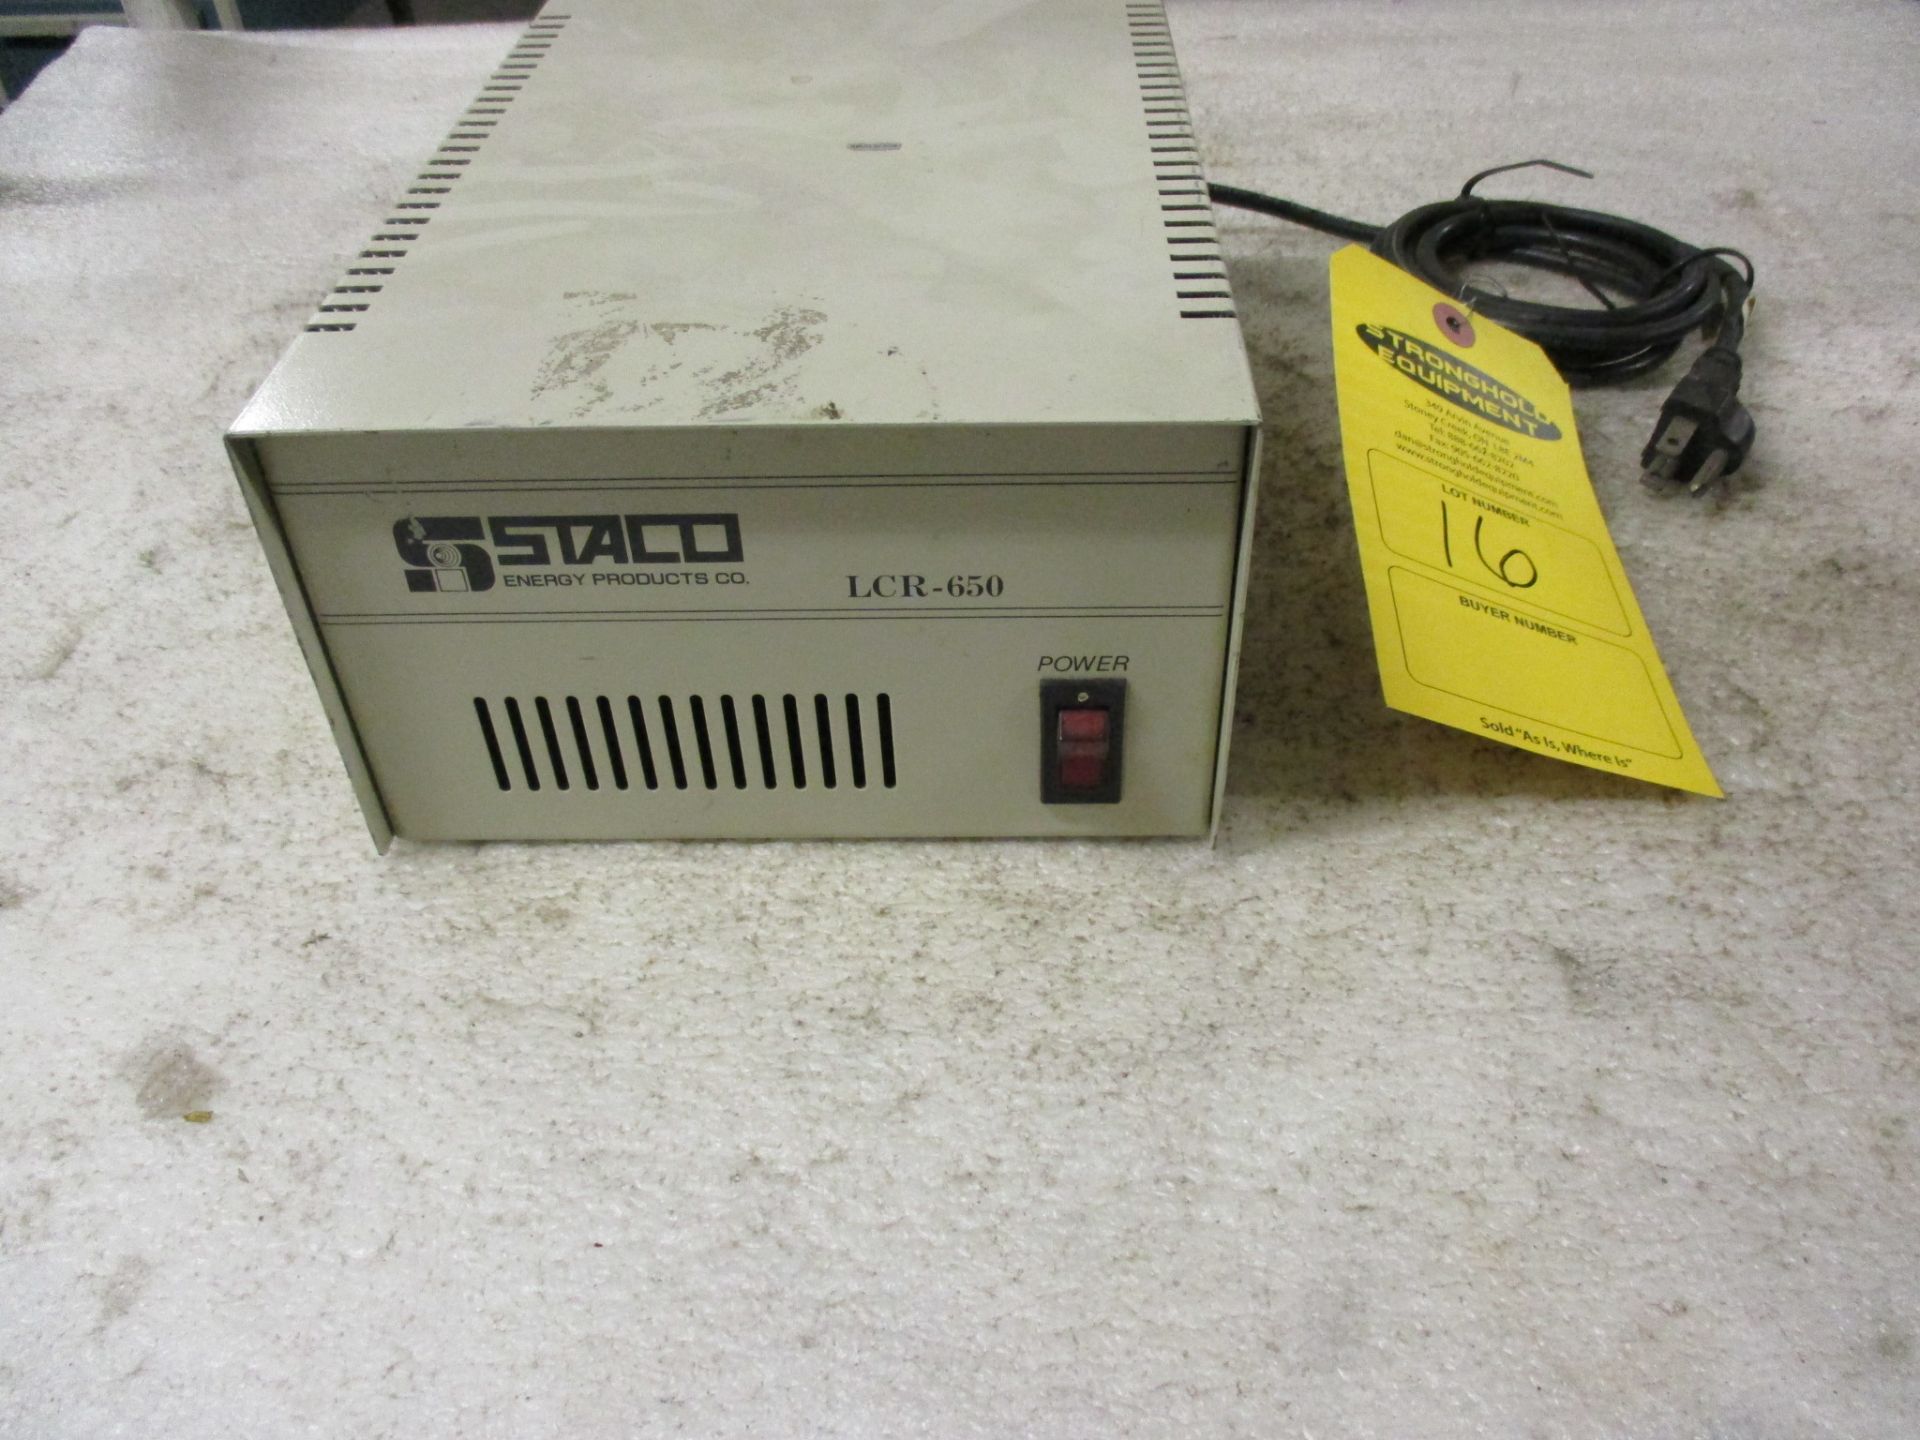 Staco Energy Products Model LCR-650 Line Conditioner controller unit